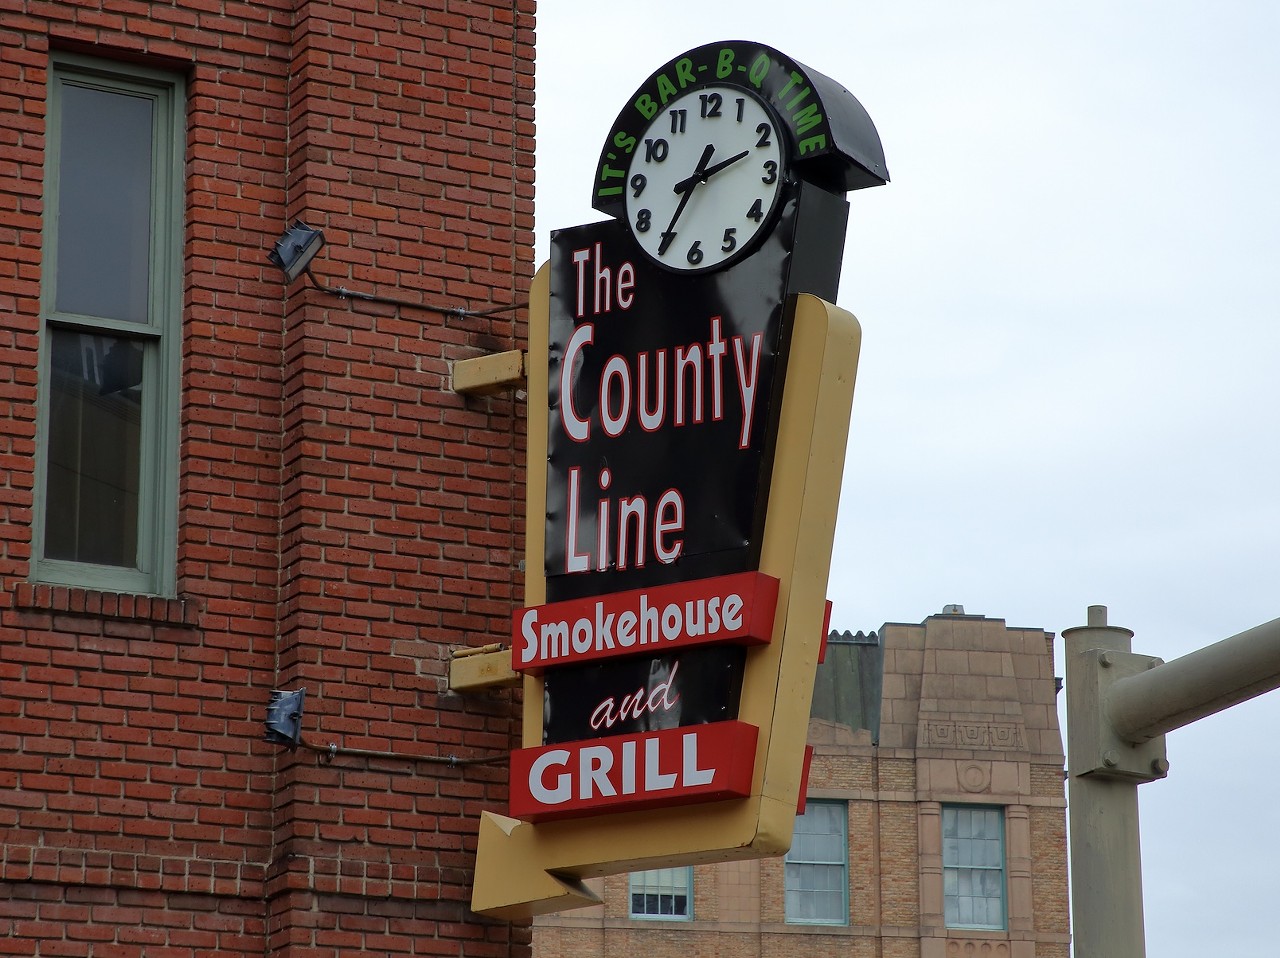 The County Line
Multiple Locations, countyline.com
The County Line is proof that Texas has a knack for good barbecue. This Austin-founded chain has two San Antonio locations, where they serve up top-notch meats and sides to match for a Texas-inspired meal that will definitely have you salivating.